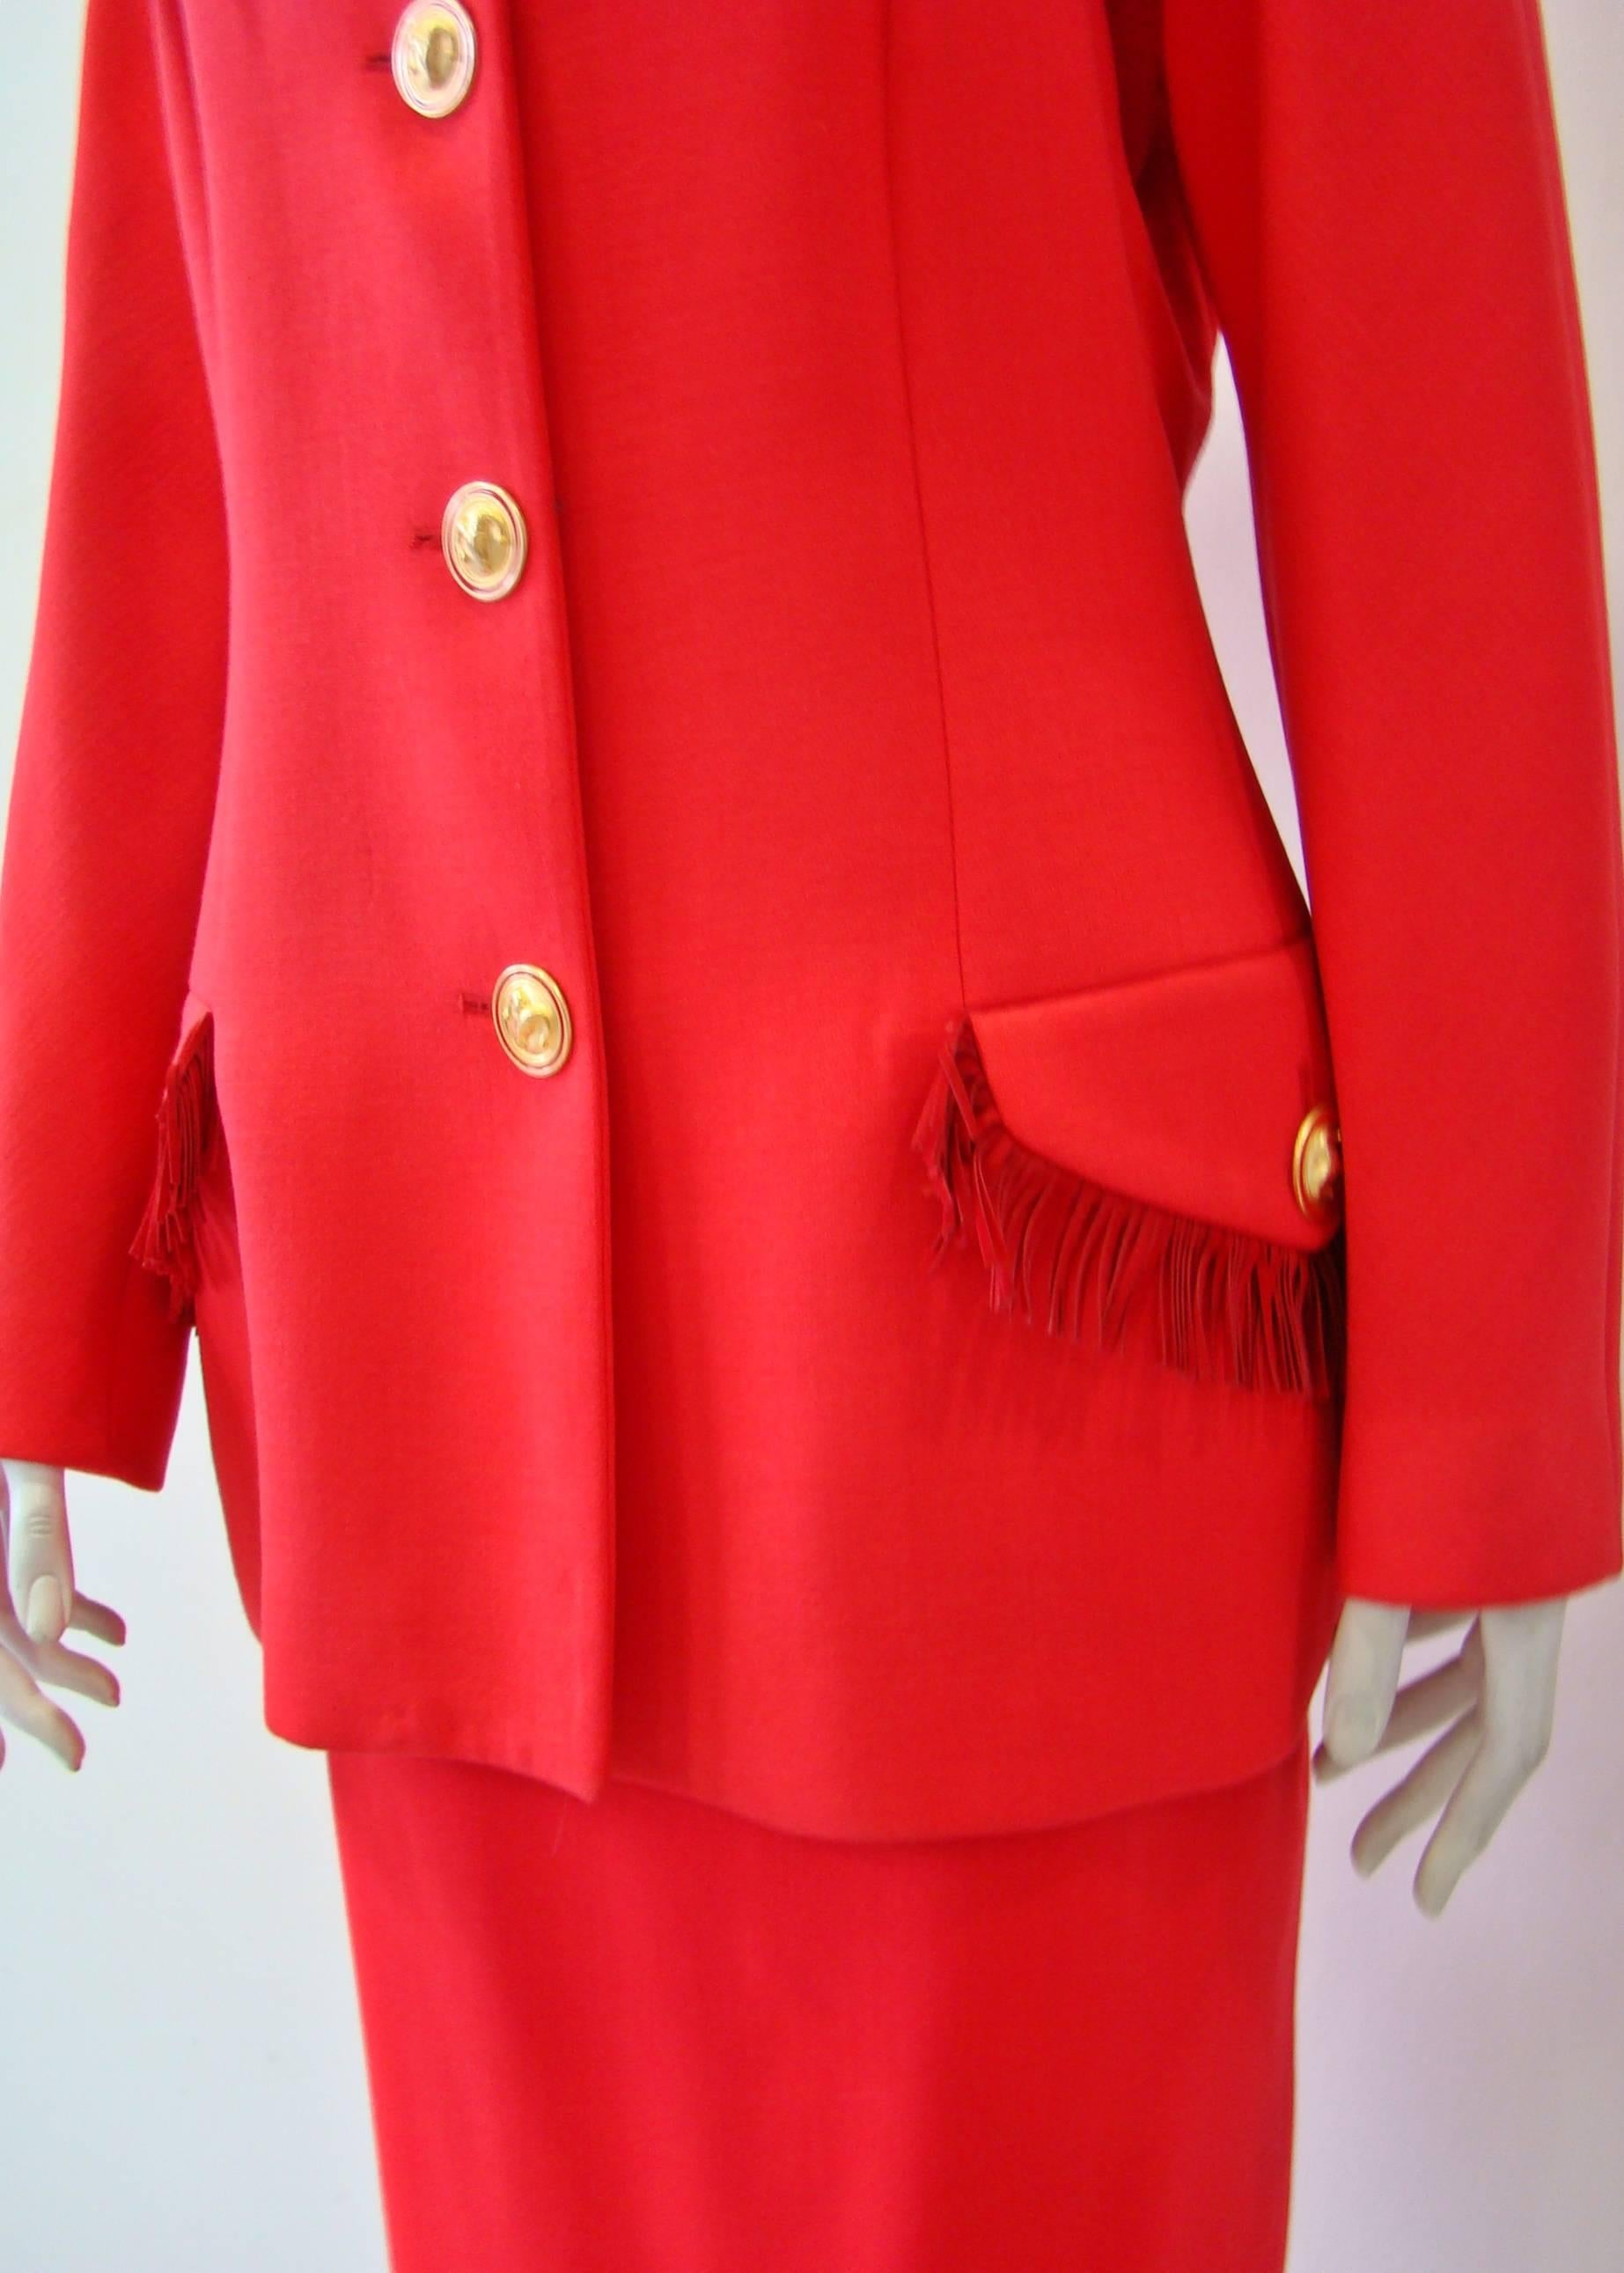 Red Istante By Gianni Versace Frinde Skirt Suit Fall 1992 For Sale